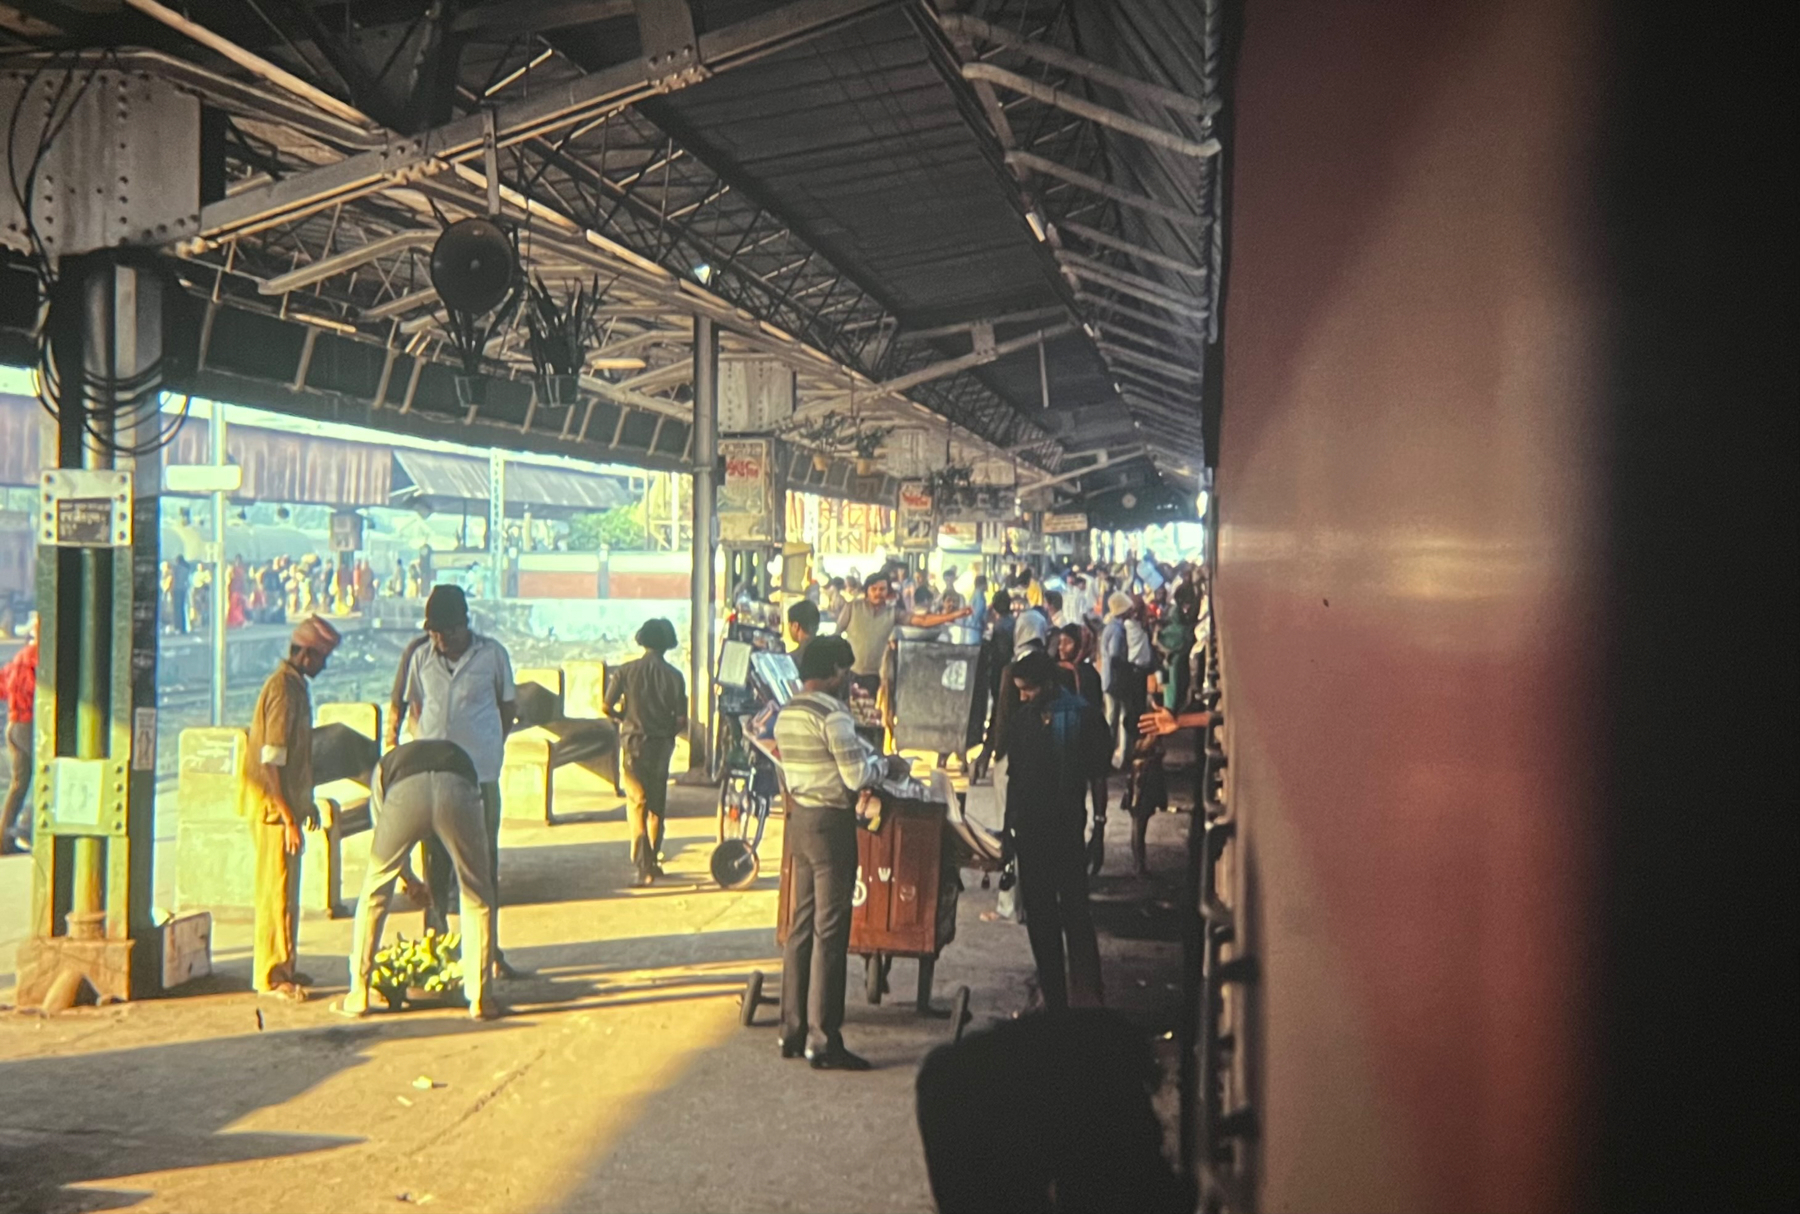 A bustling train station in India with passengers walking, standing, and talking; some are seated waiting for trains. Platform shelters and station signage are visible, alongside luggage and a vendor cart. The view is framed by a train on the right edge.